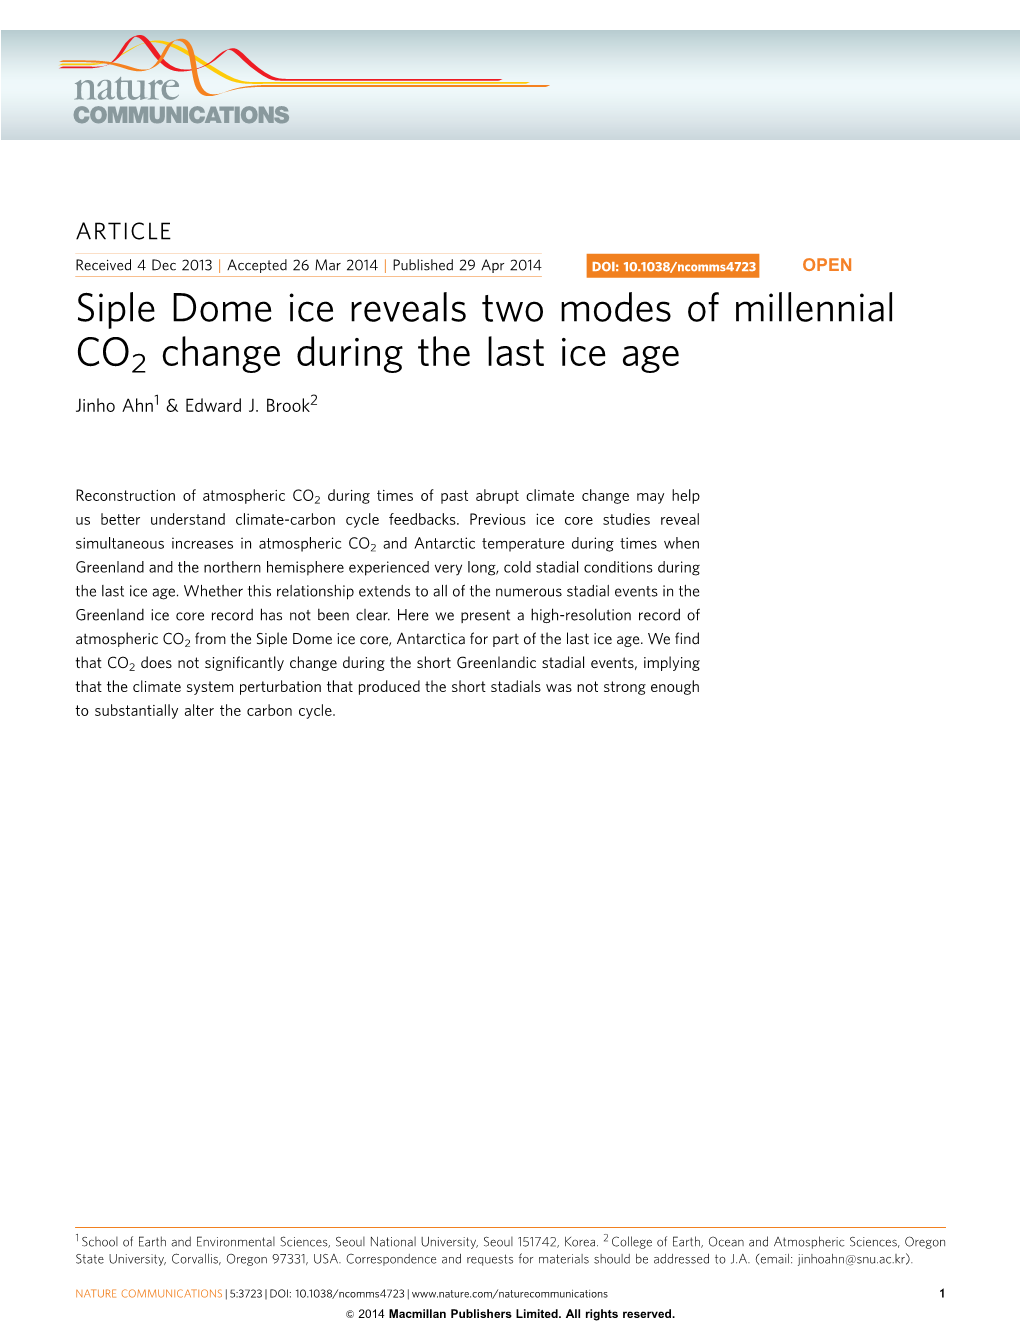 Siple Dome Ice Reveals Two Modes of Millennial CO2 Change During the Last Ice Age